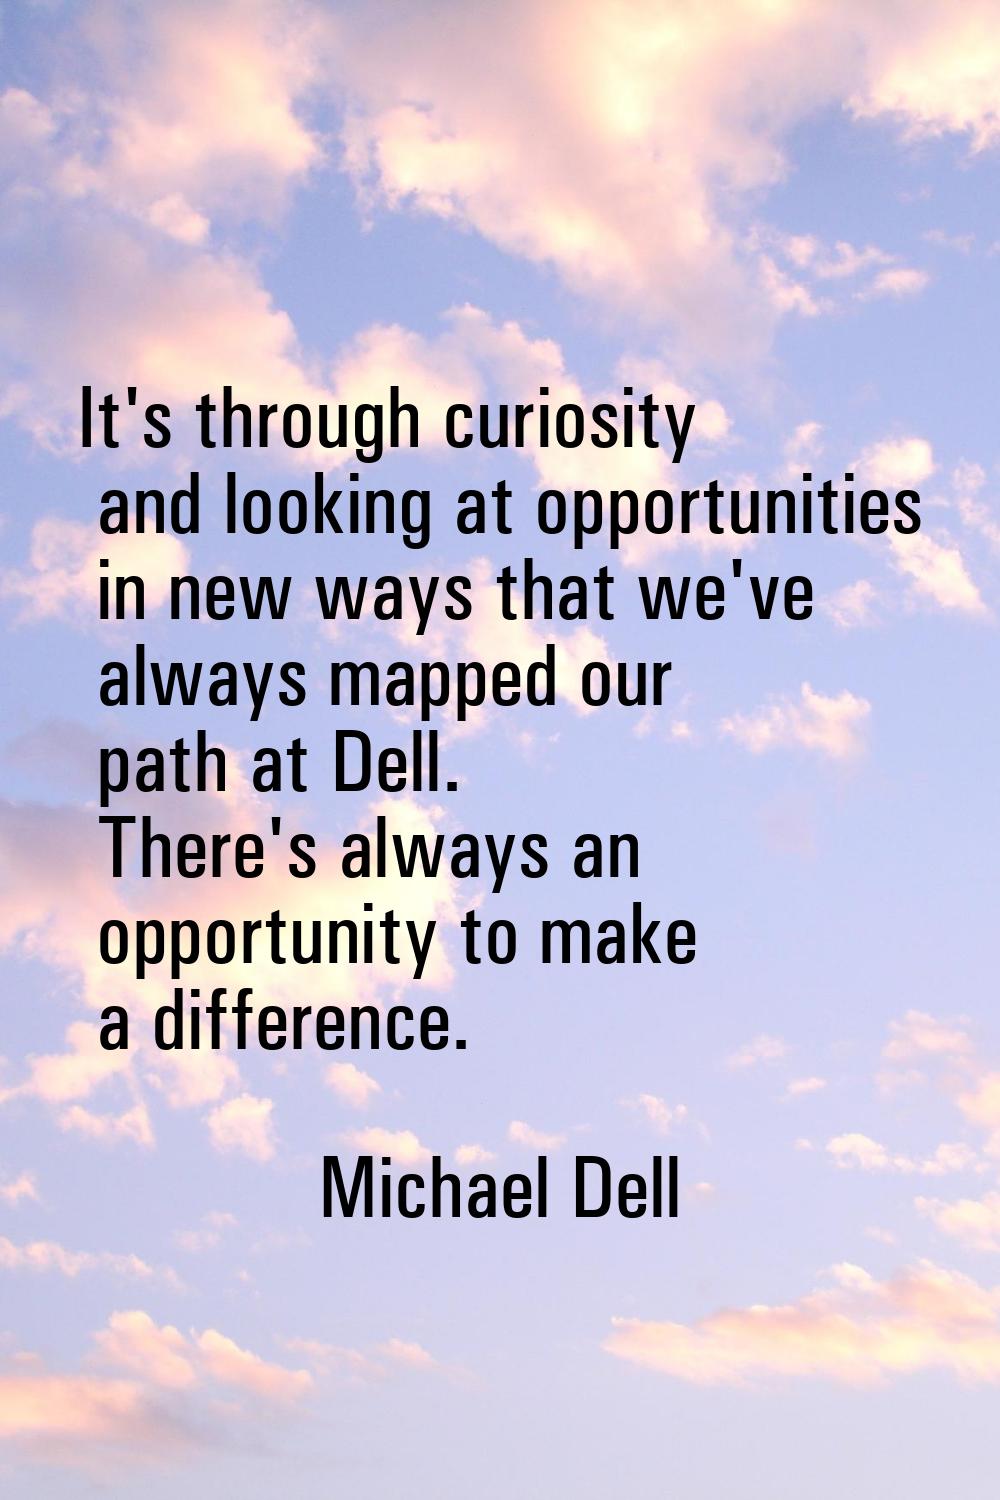 It's through curiosity and looking at opportunities in new ways that we've always mapped our path a